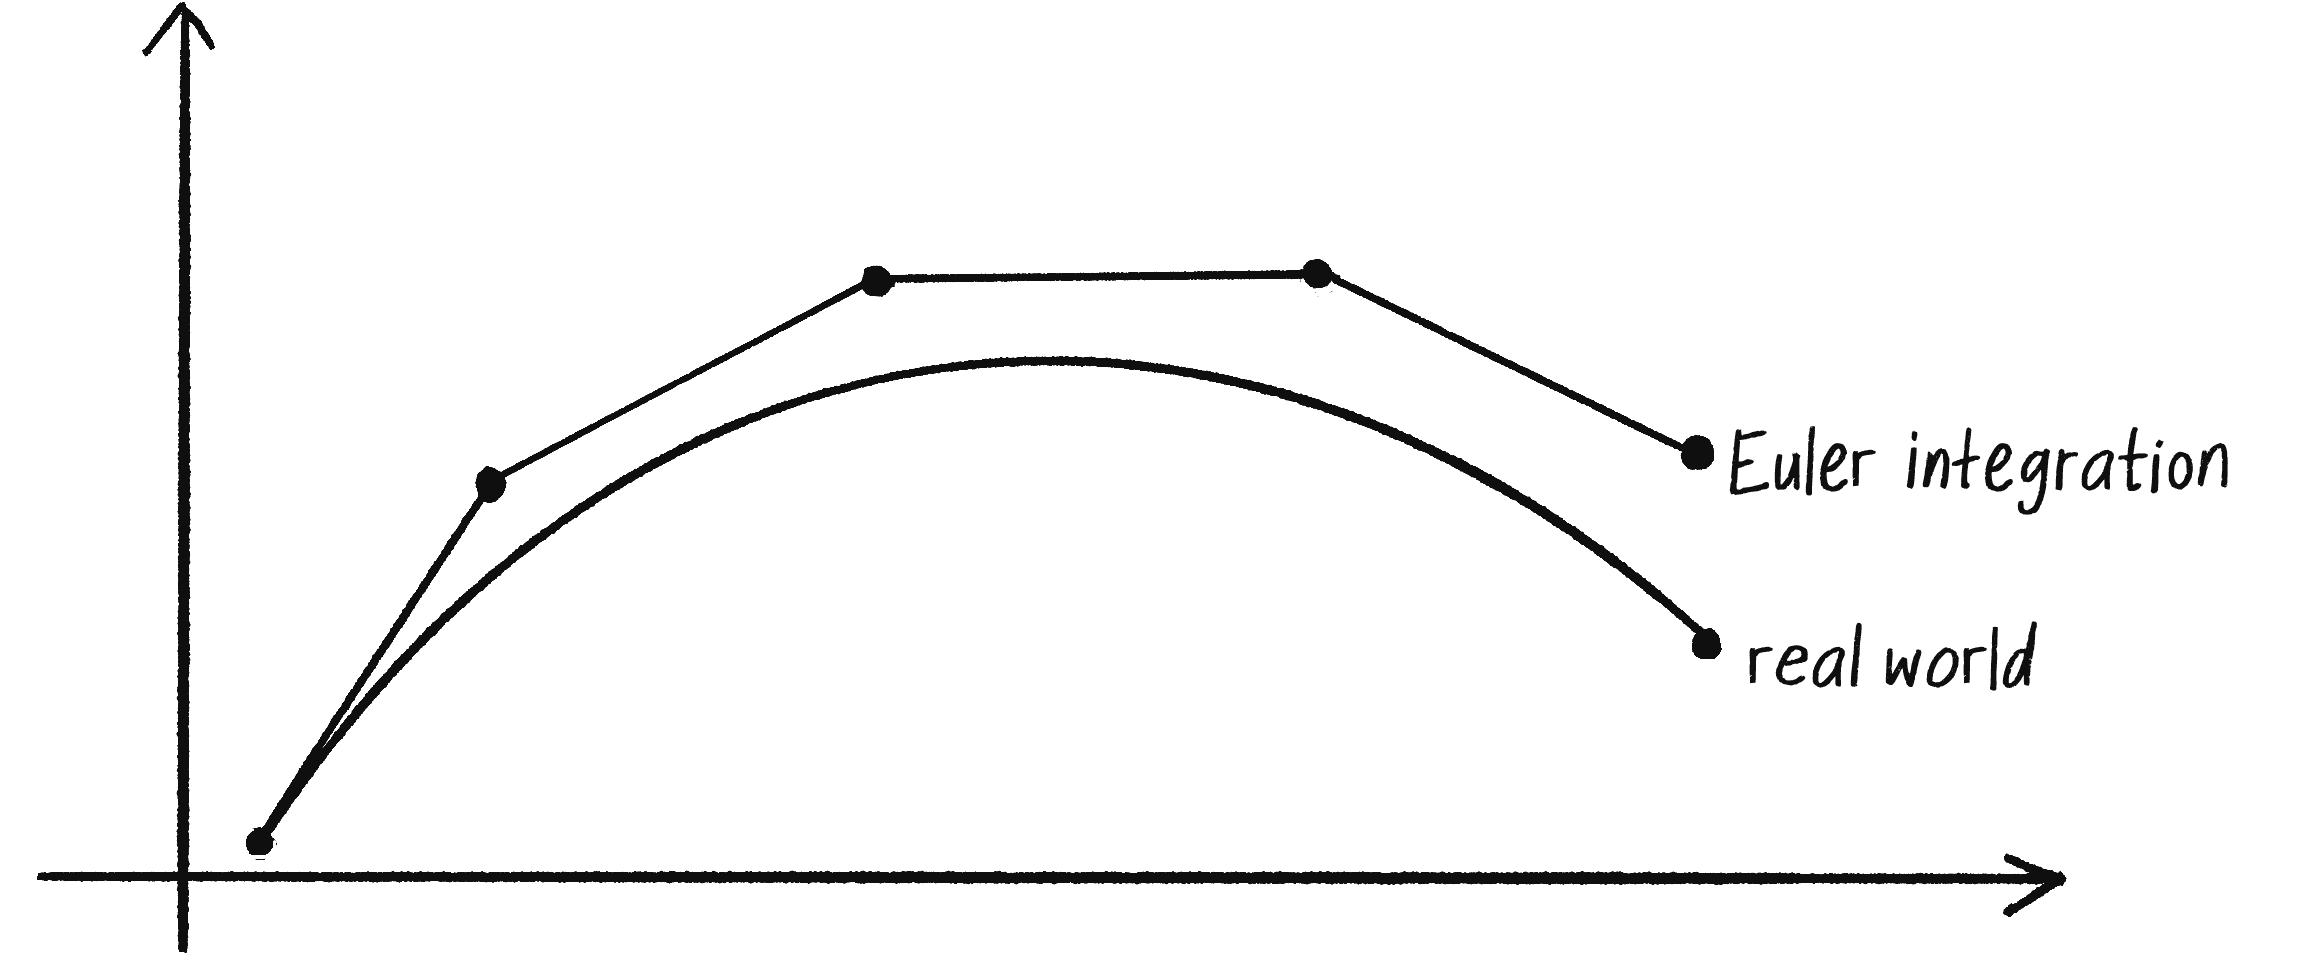 Figure 6.12: The Euler approximation of a curve